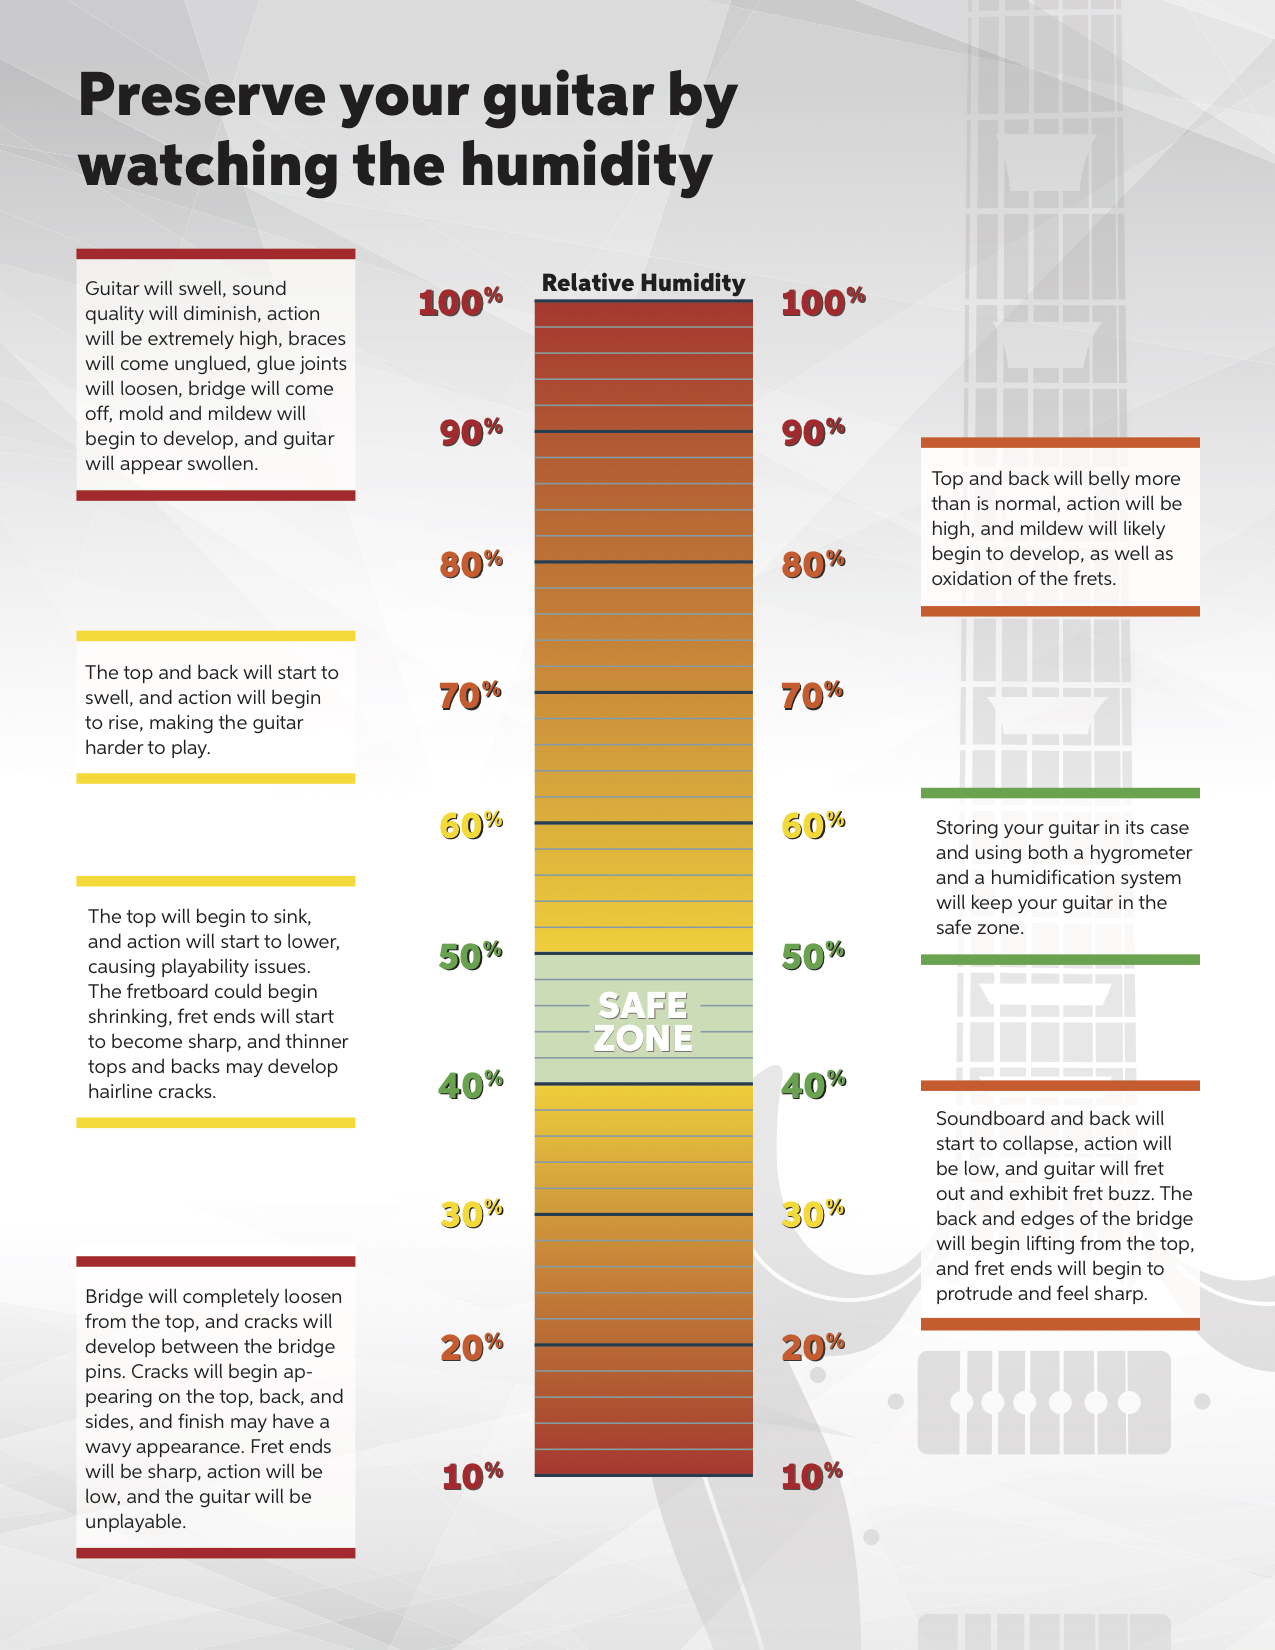 https://www.sweetwater.com/insync/media/2017/09/Humidity-Infographic.jpg